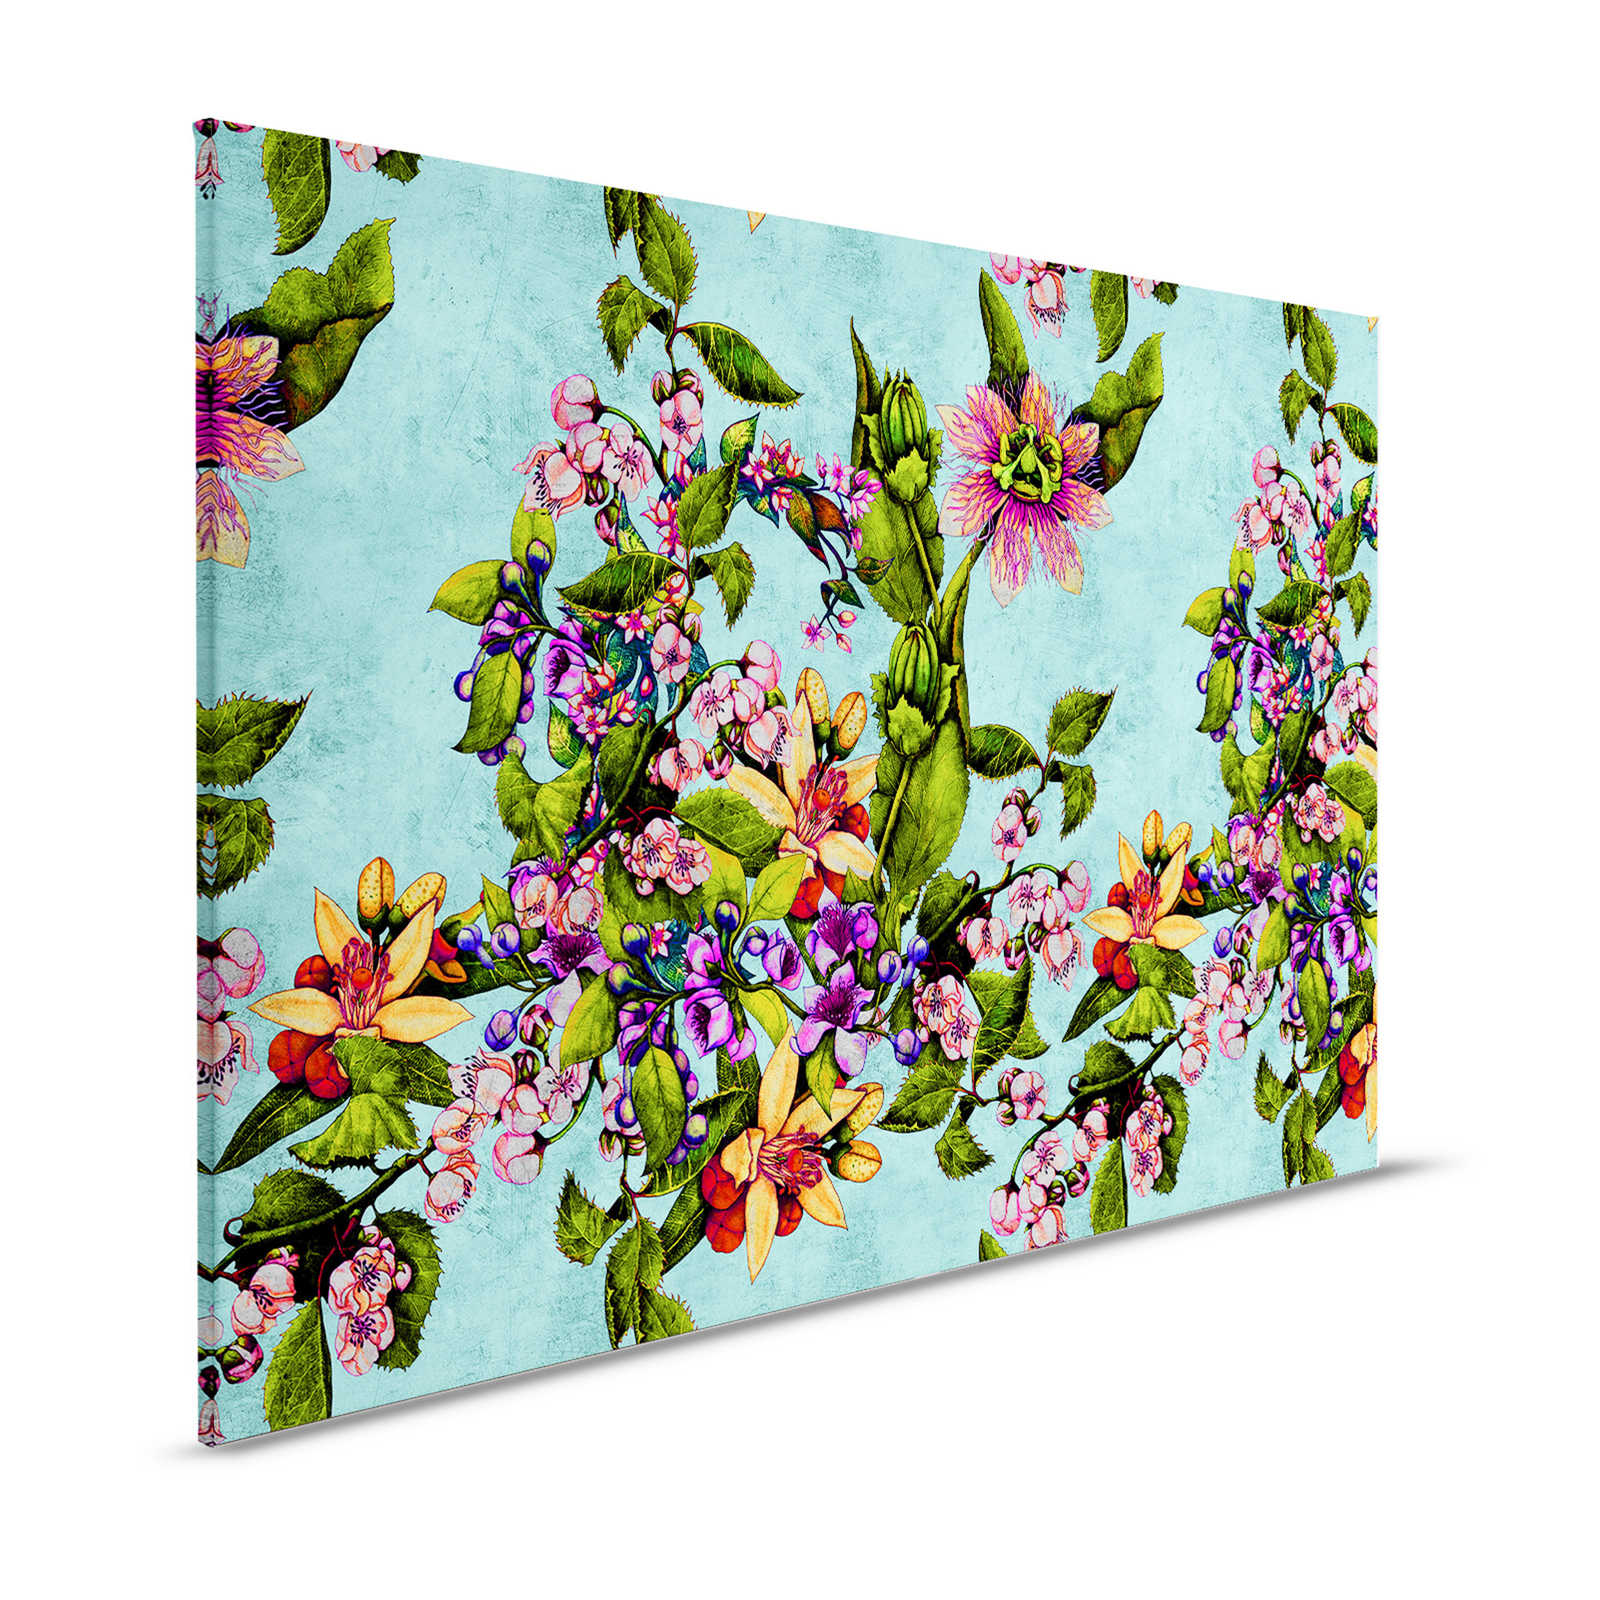 Tropical Passion 1 - Tropical Canvas Painting with Floral Pattern - 1.20 m x 0.80 m
